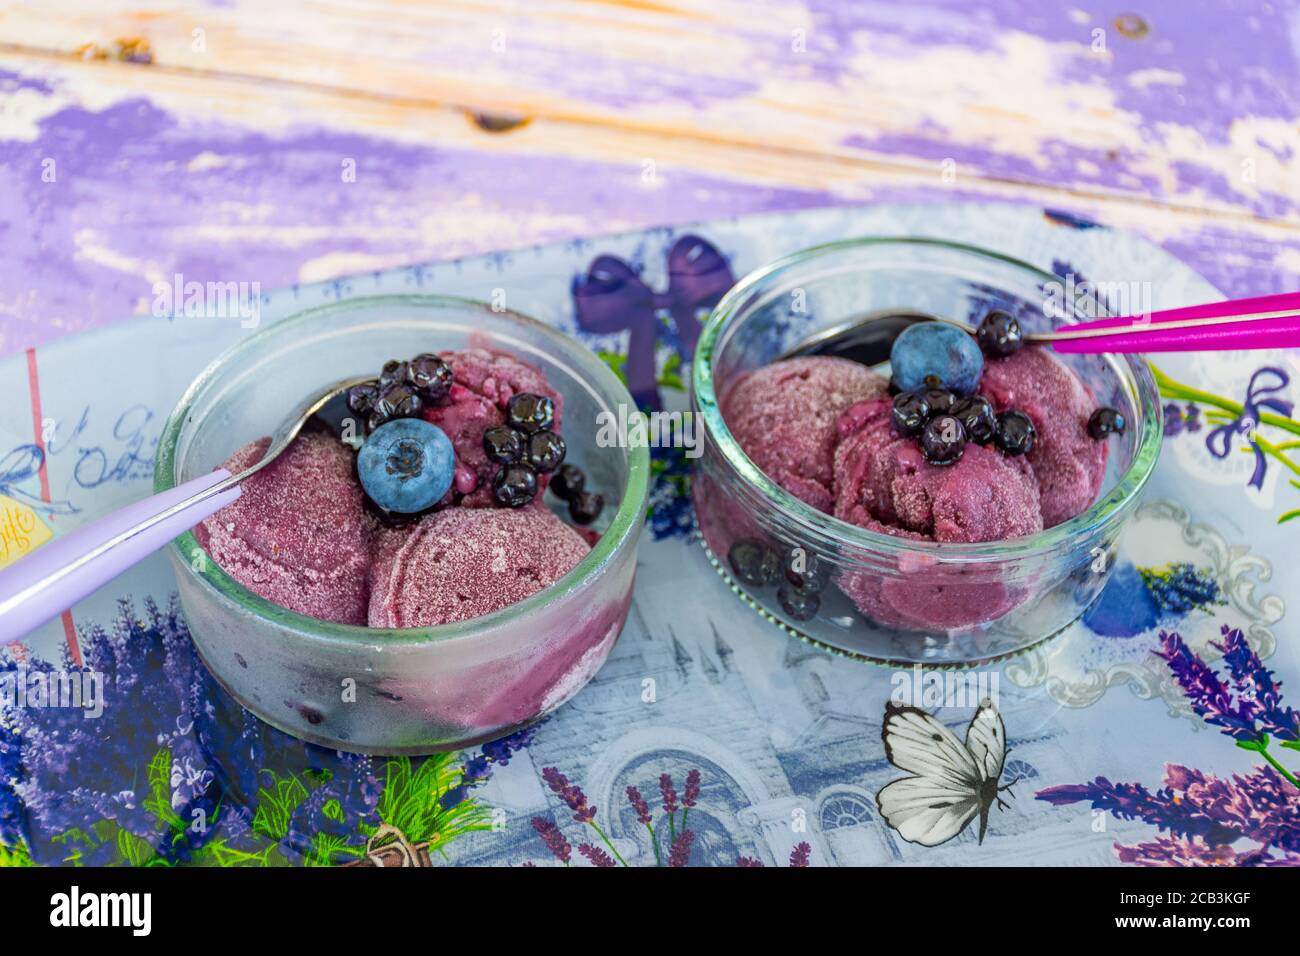 Delicious homemade lavender ice cream in a glass cup with blueberries and wild berries, close up Stock Photo